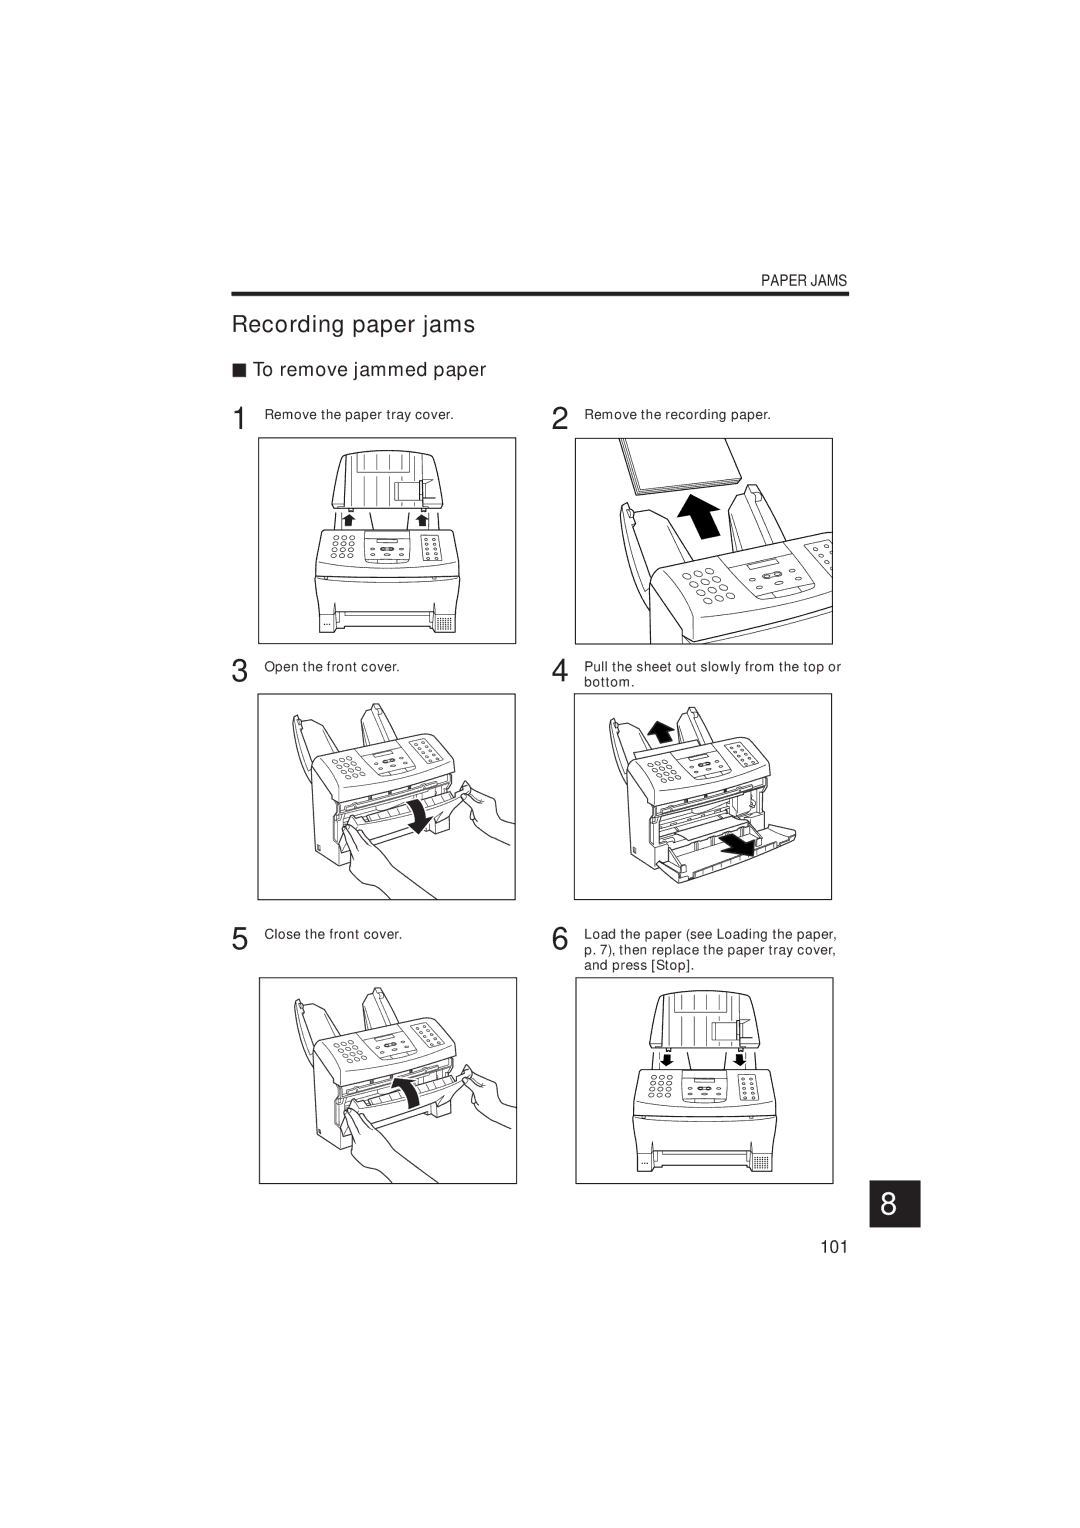 Canon B155 manual Recording paper jams, To remove jammed paper, 101, Paper Jams, Close the front cover 